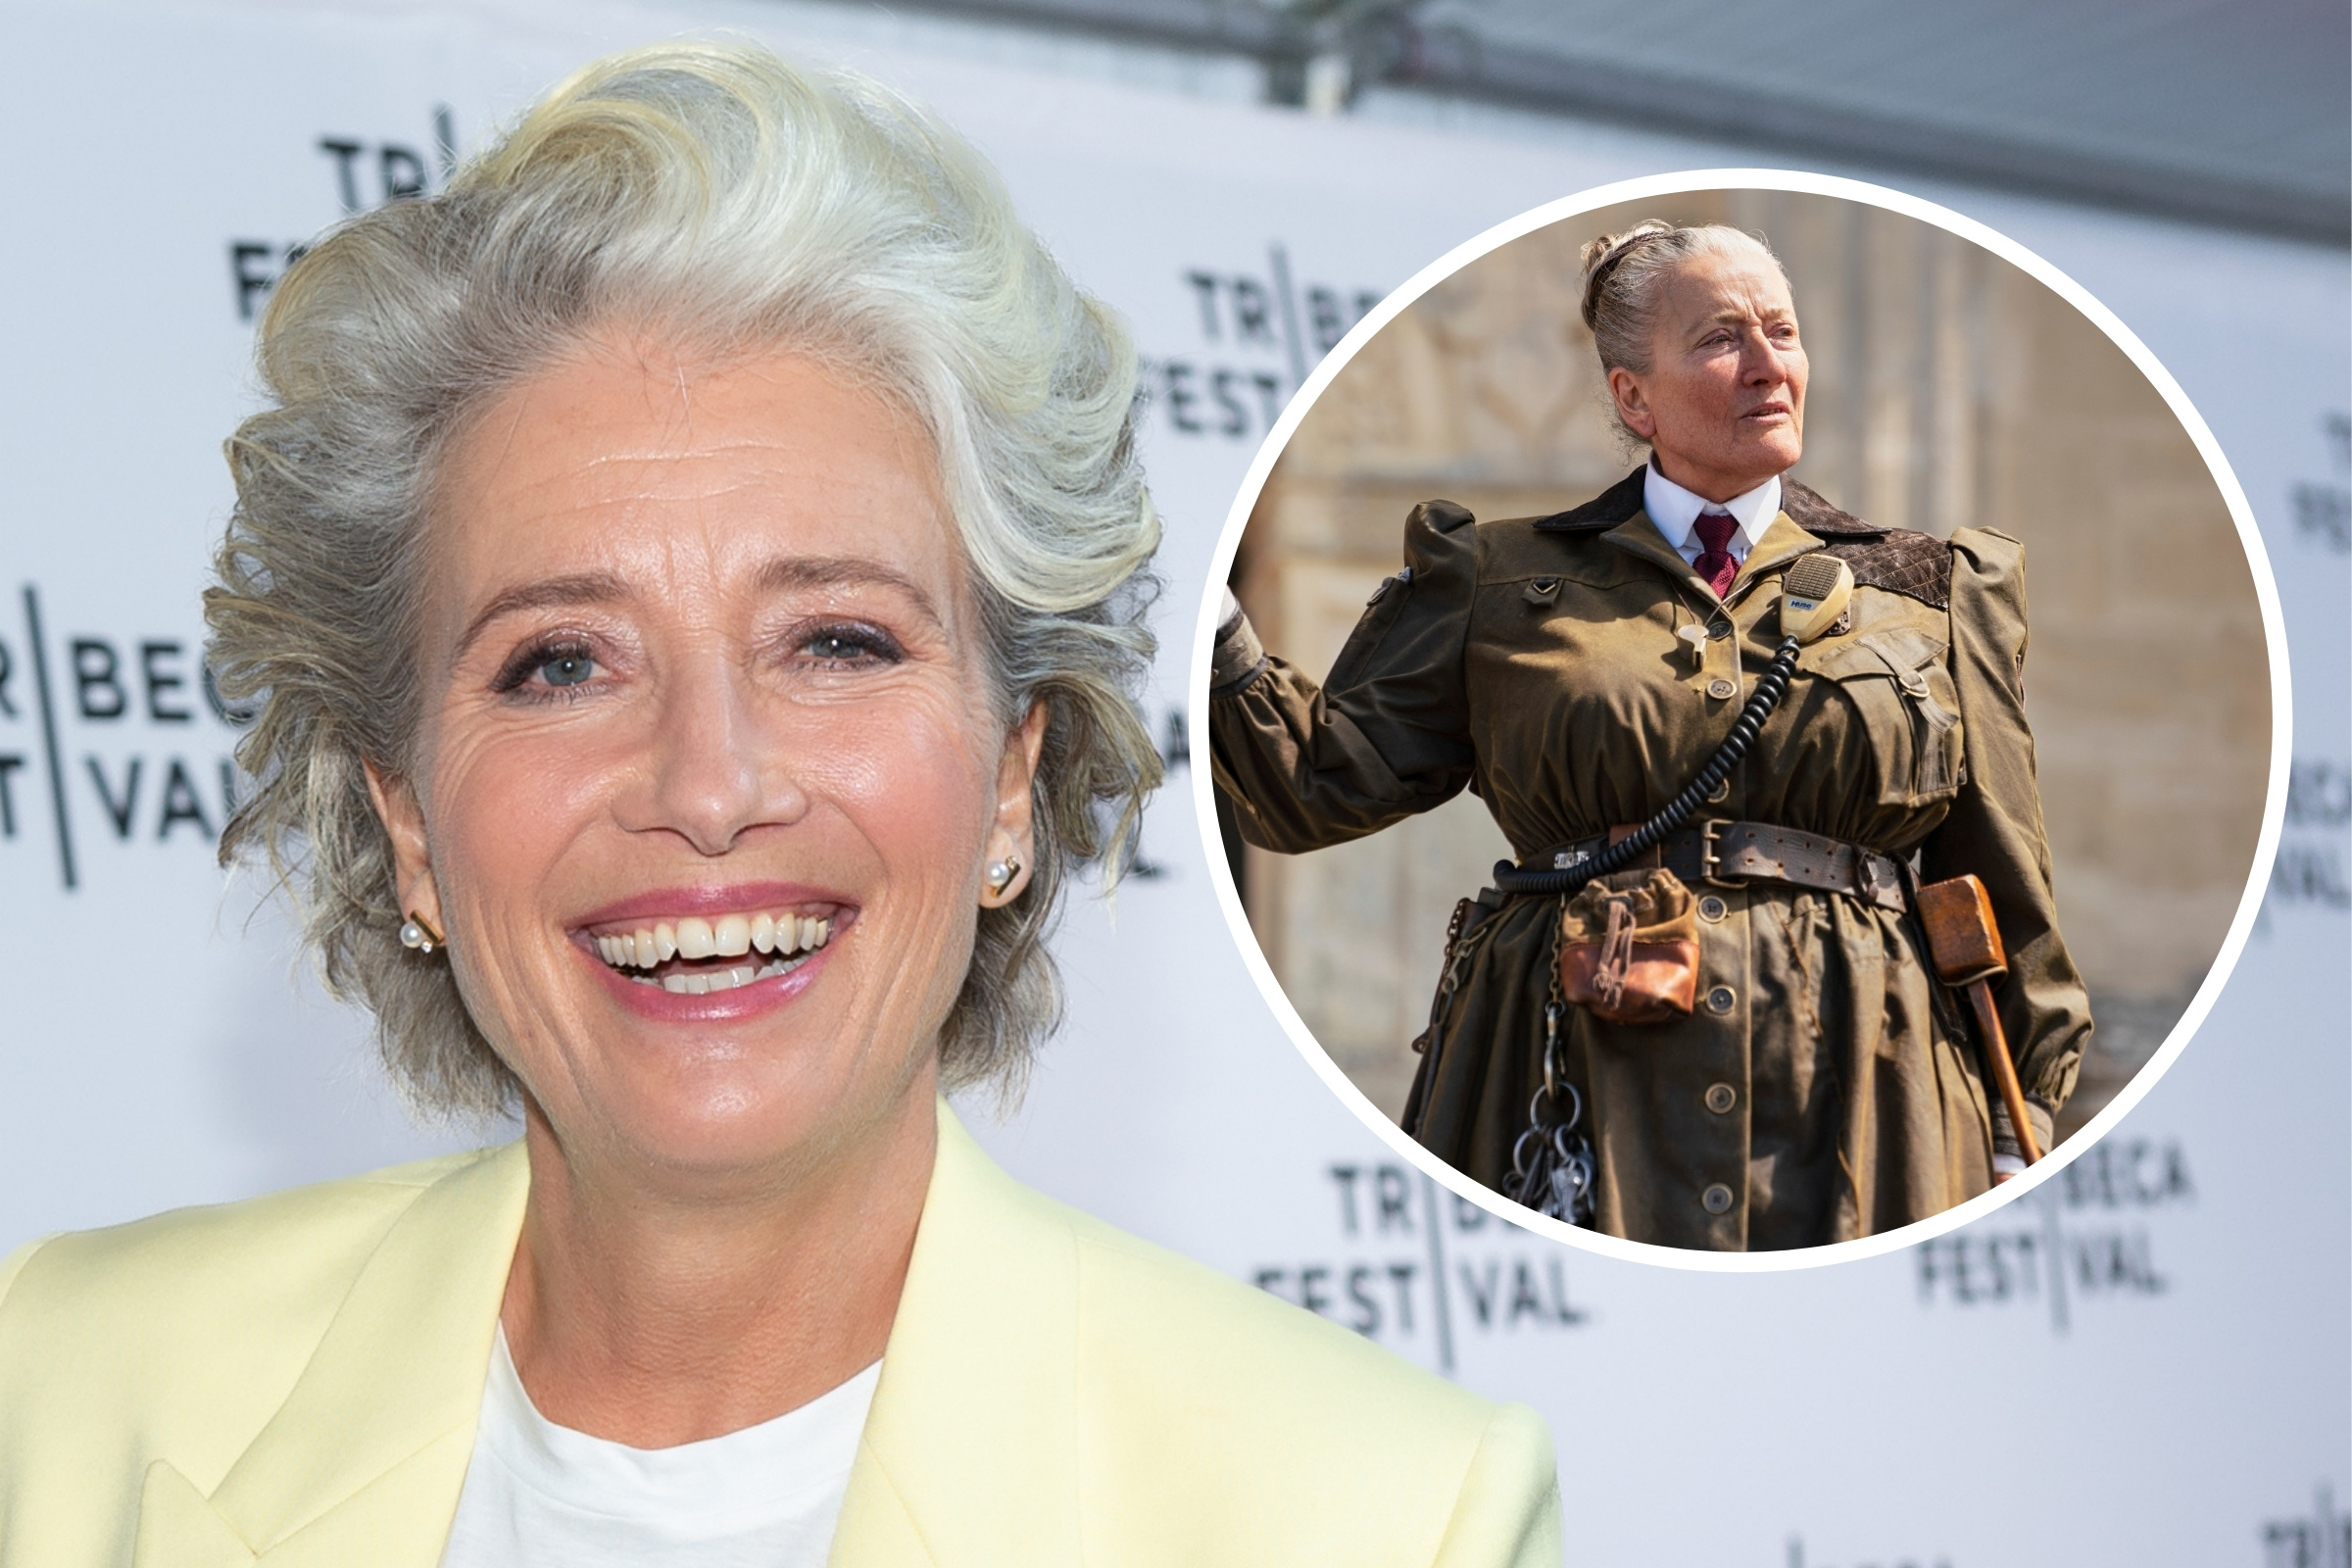 Emma Thompson Photos Spark Debate About ‘Big Suits’ In Movies